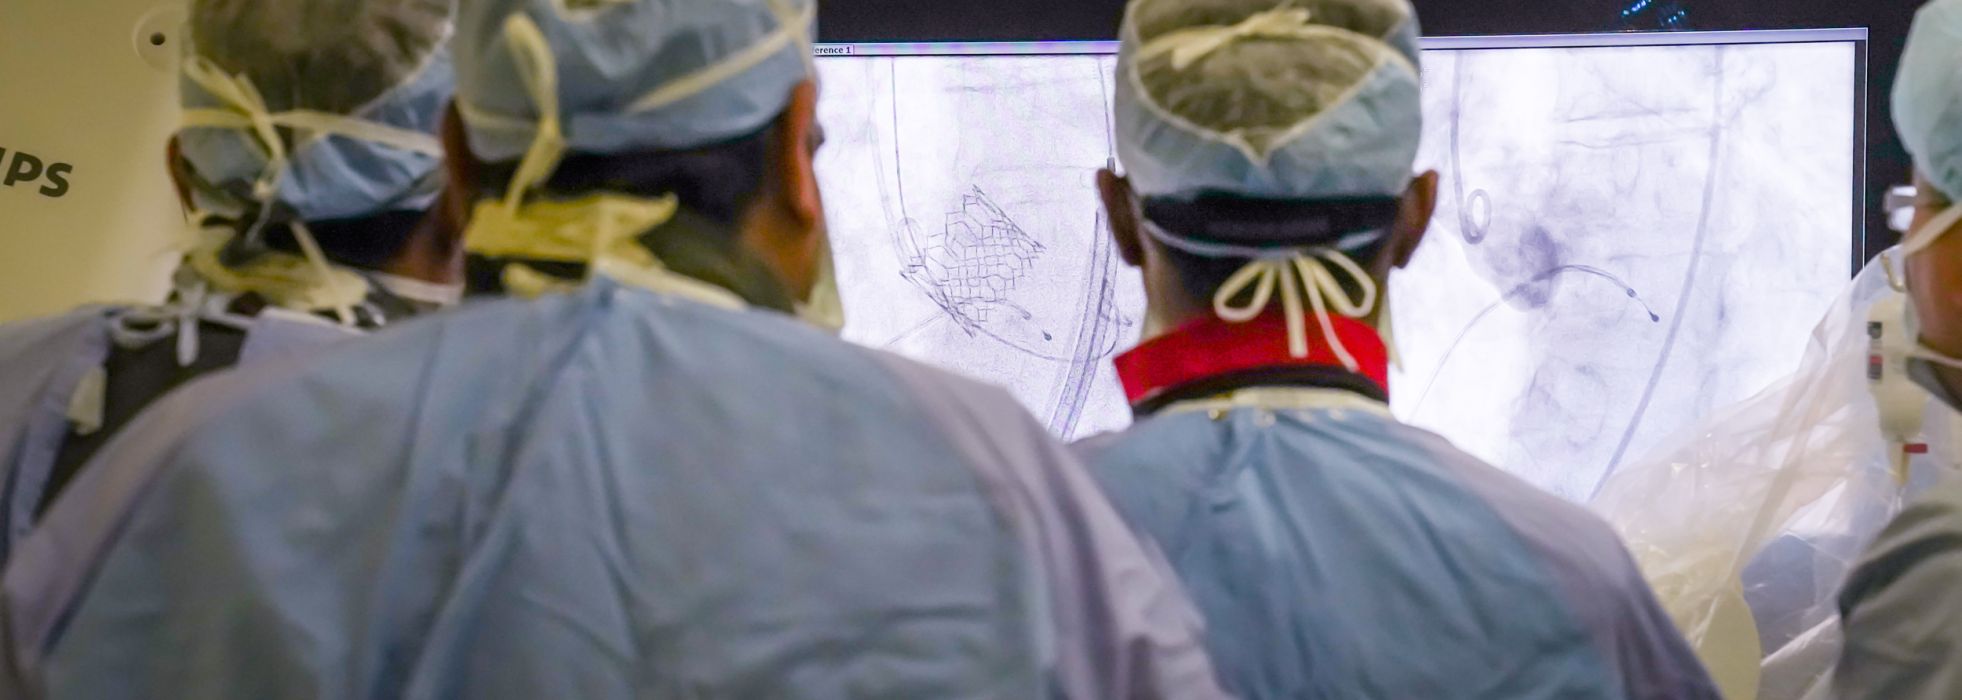 Interventional cardiologists looking at screen int the cath lab